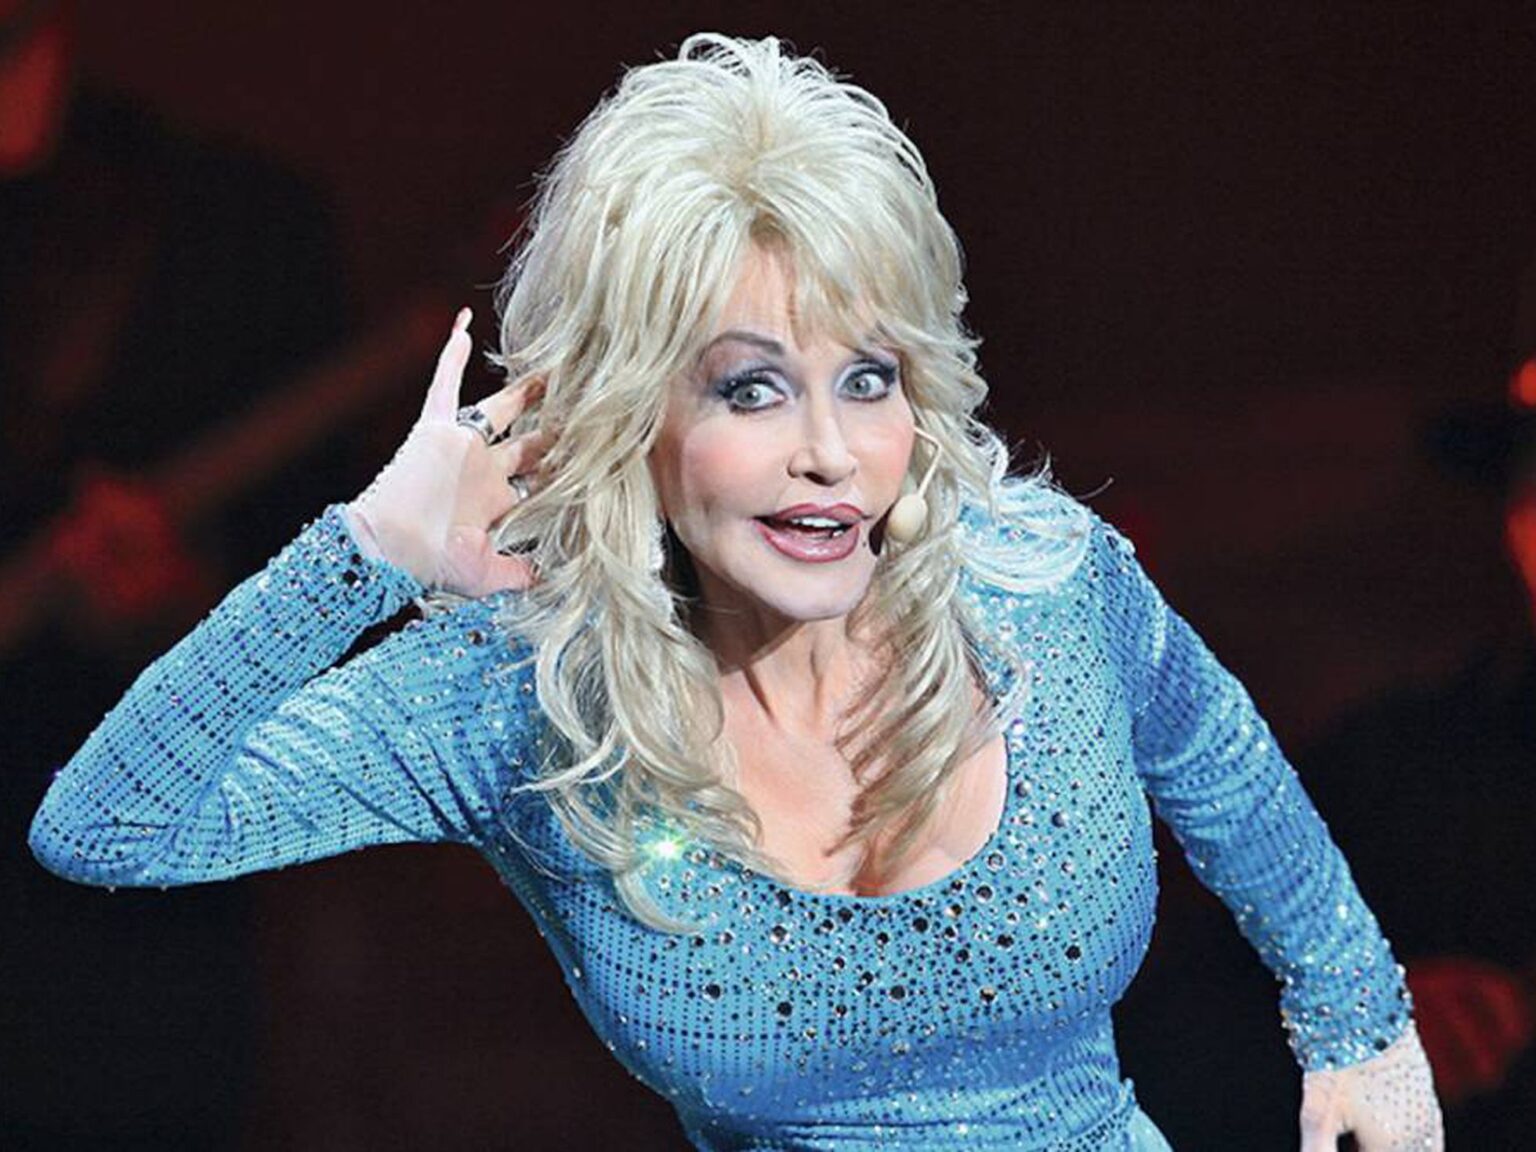 Dolly Parton is one of the most talented and recognized female singers in the United States but how big s her net worth? Here's all you need to know.